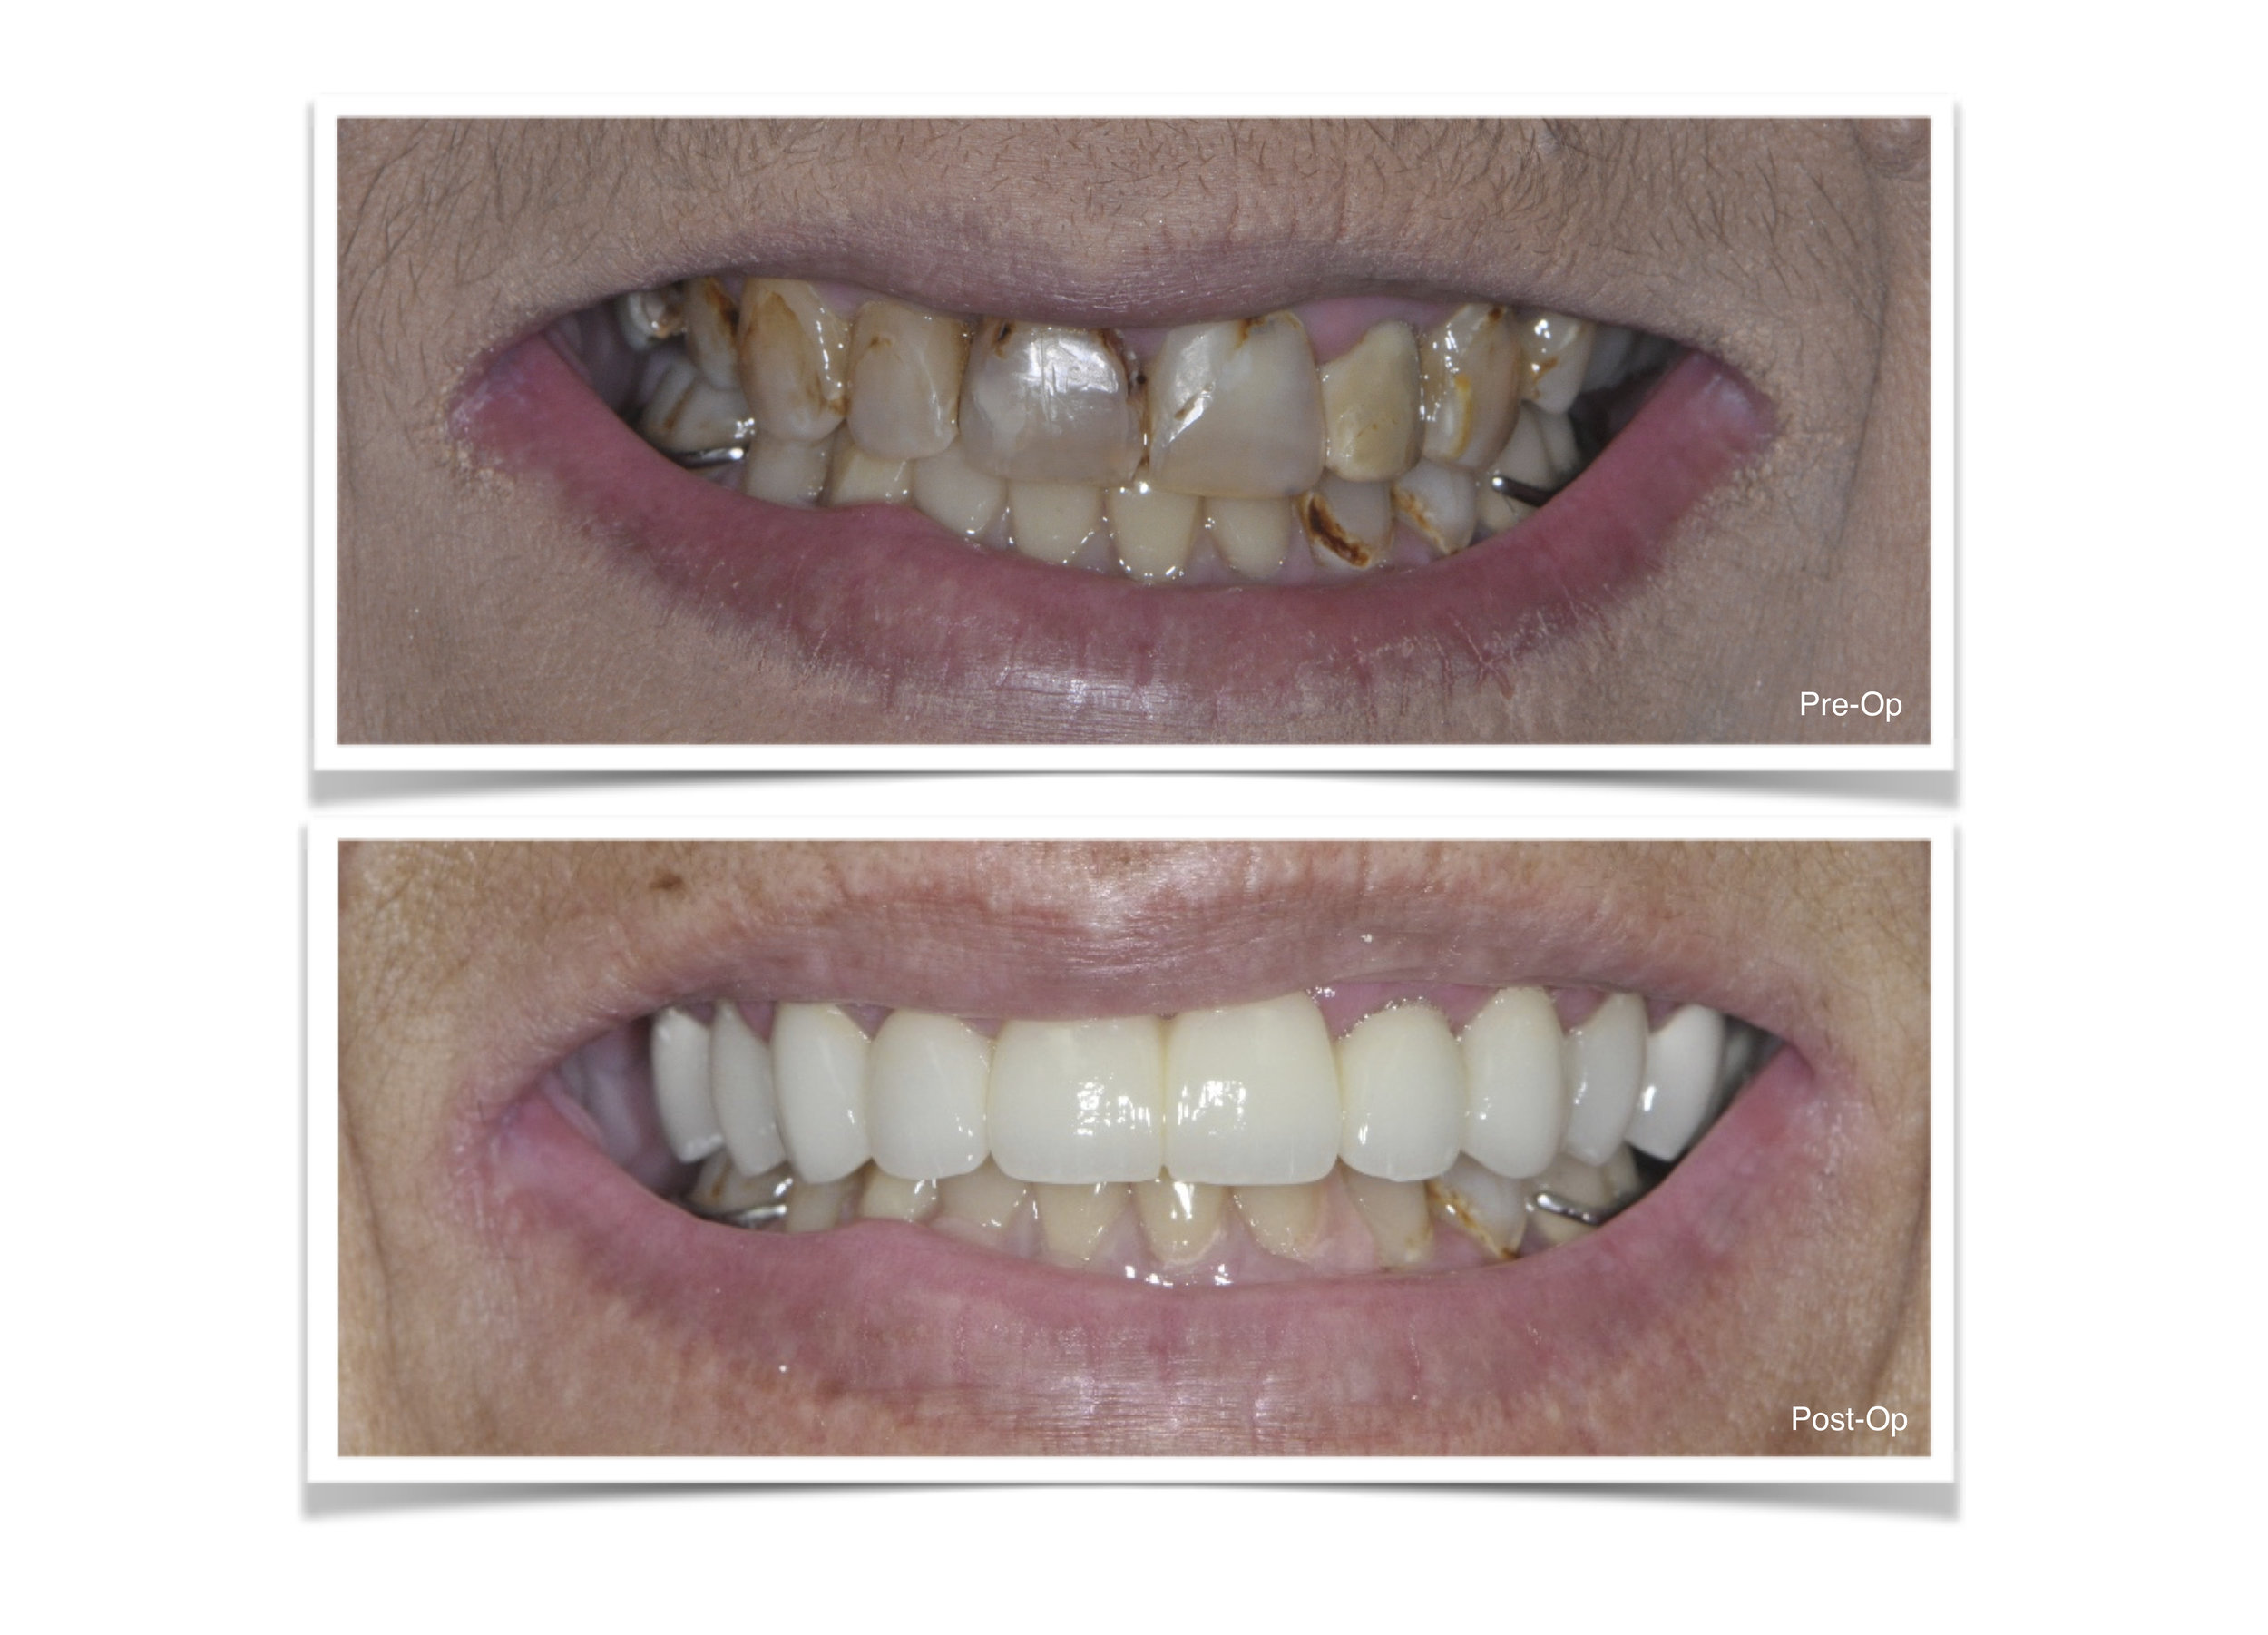 Complete Restoration of the Top Teeth